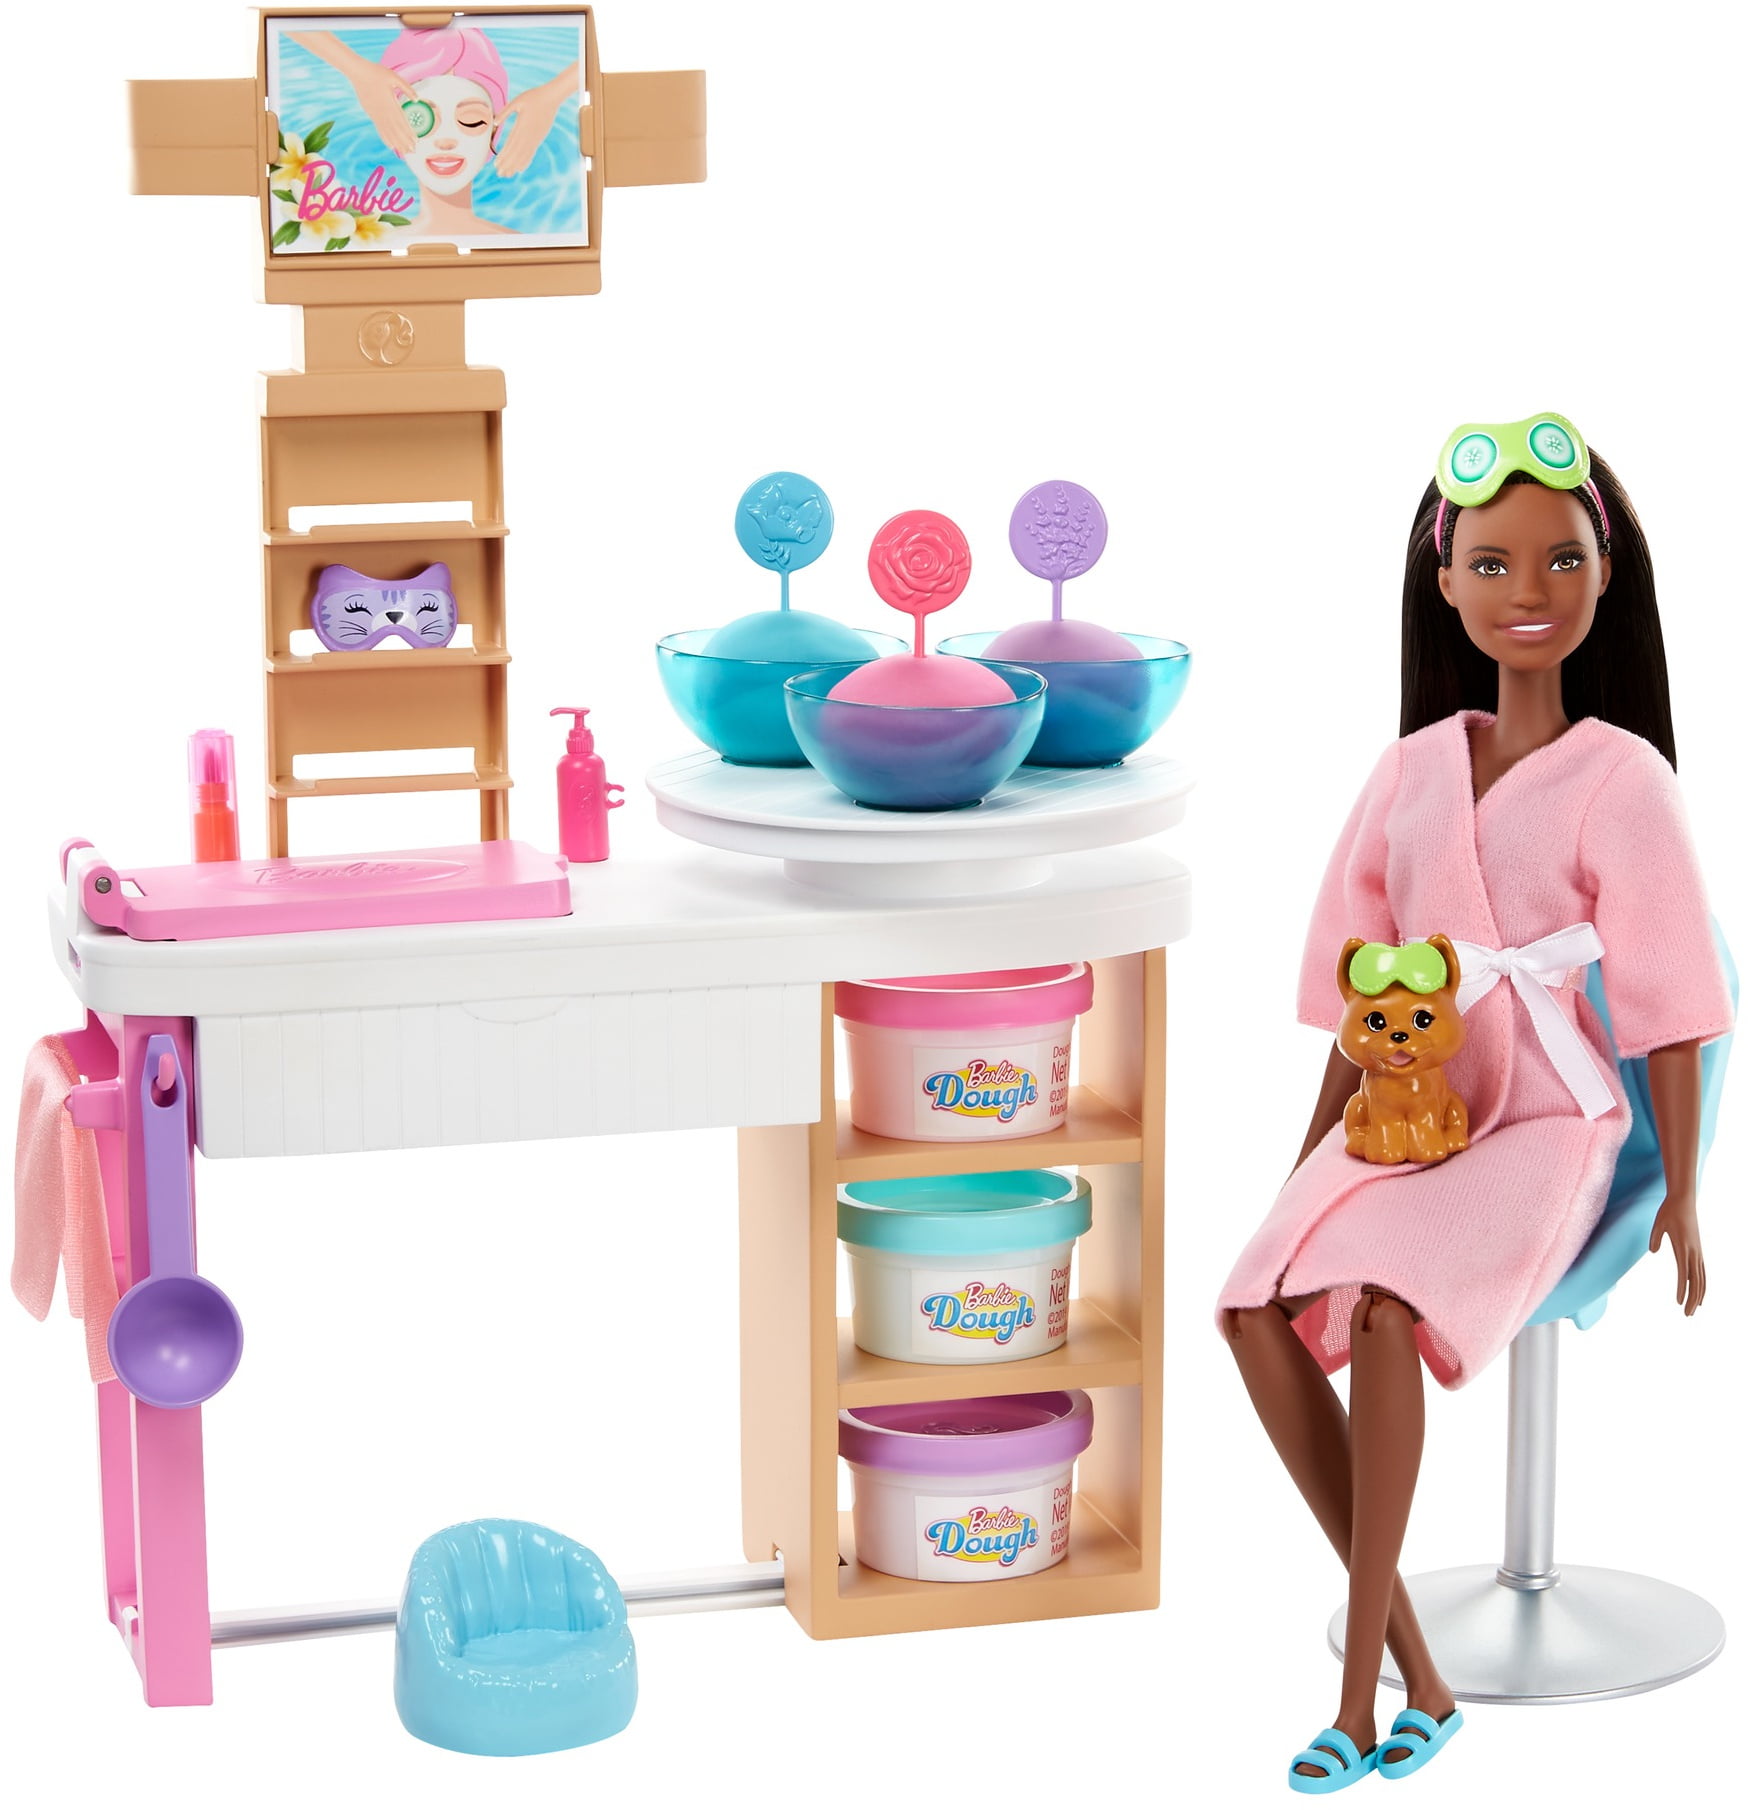 Barbie Career Cake Decorating Playset with Blonde Baker Doll 